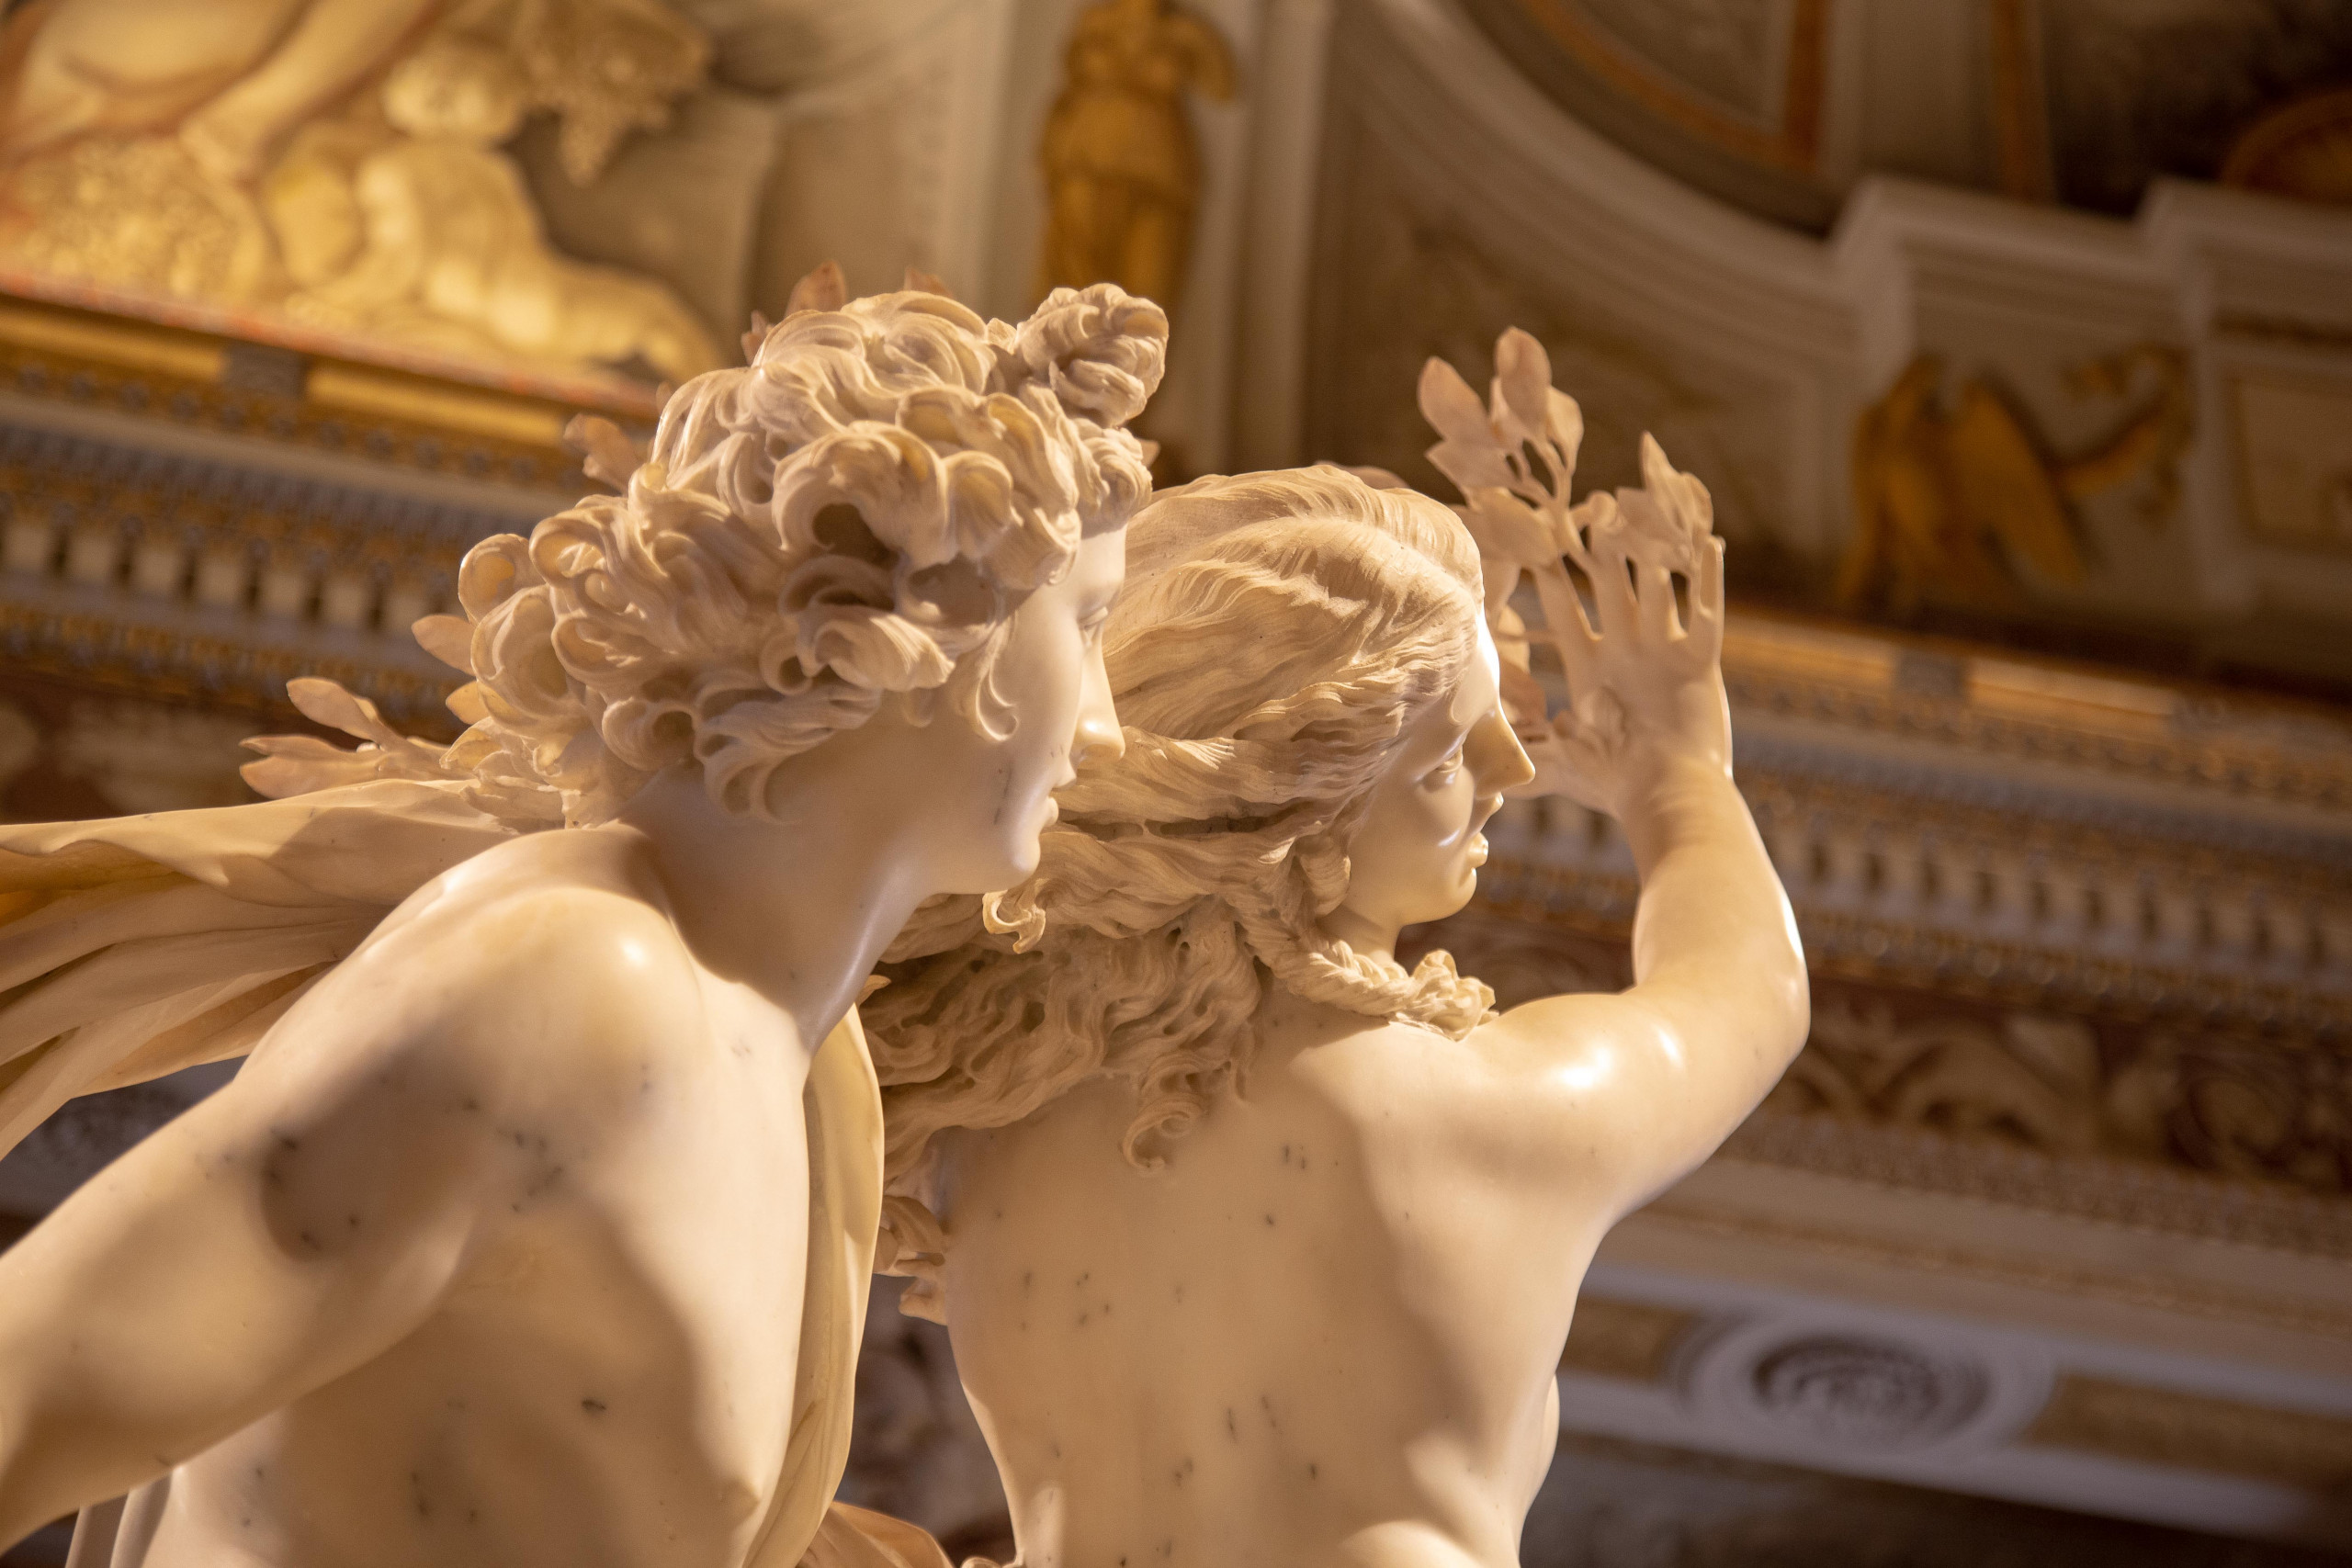 THE 2023 EXHIBITION PROGRAM OF THE GALLERIA BORGHESE